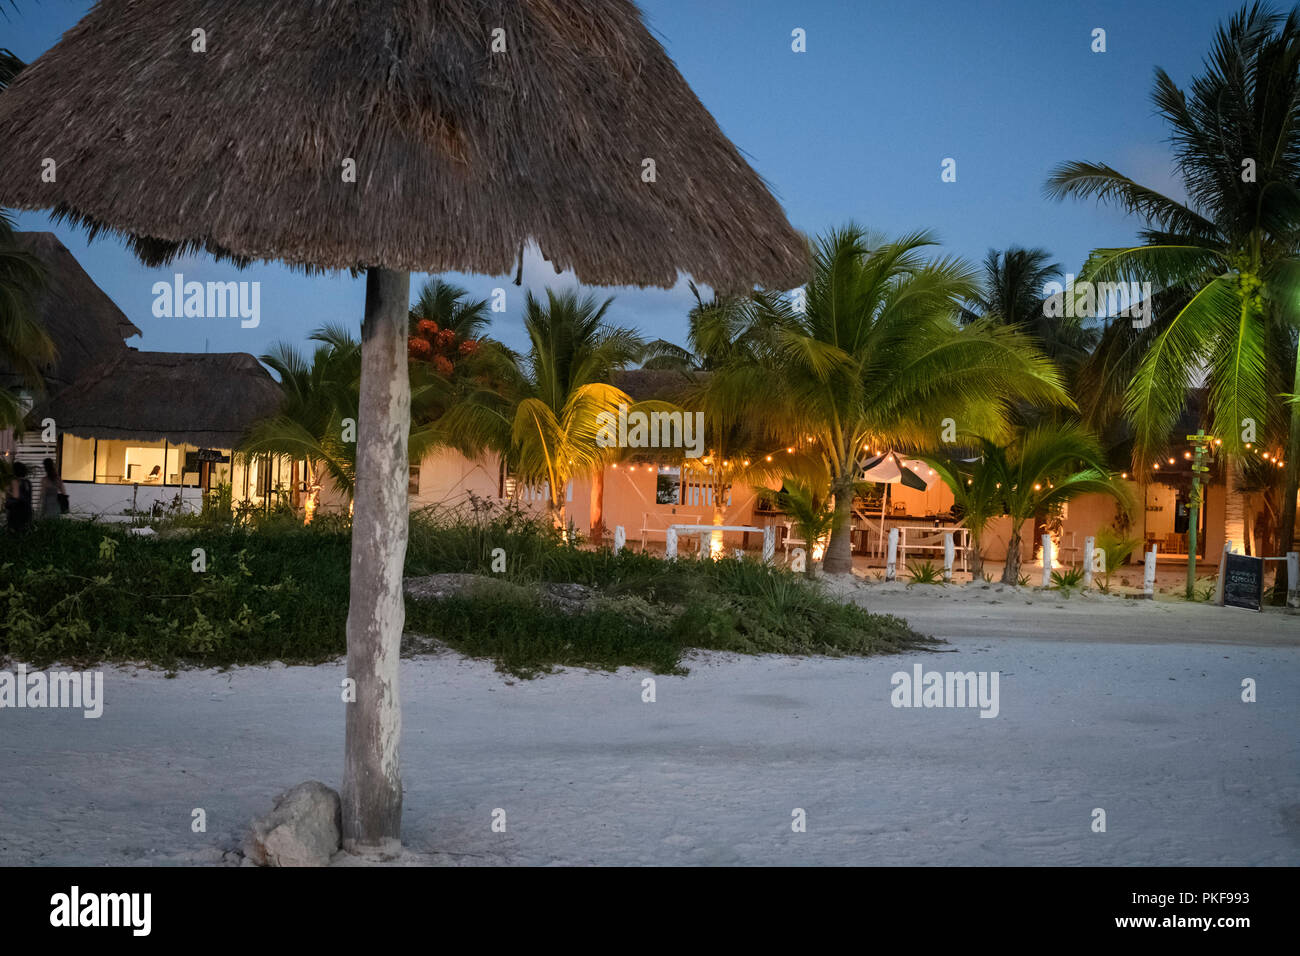 Palm trees and palapa on a Mexican beach Stock Photo